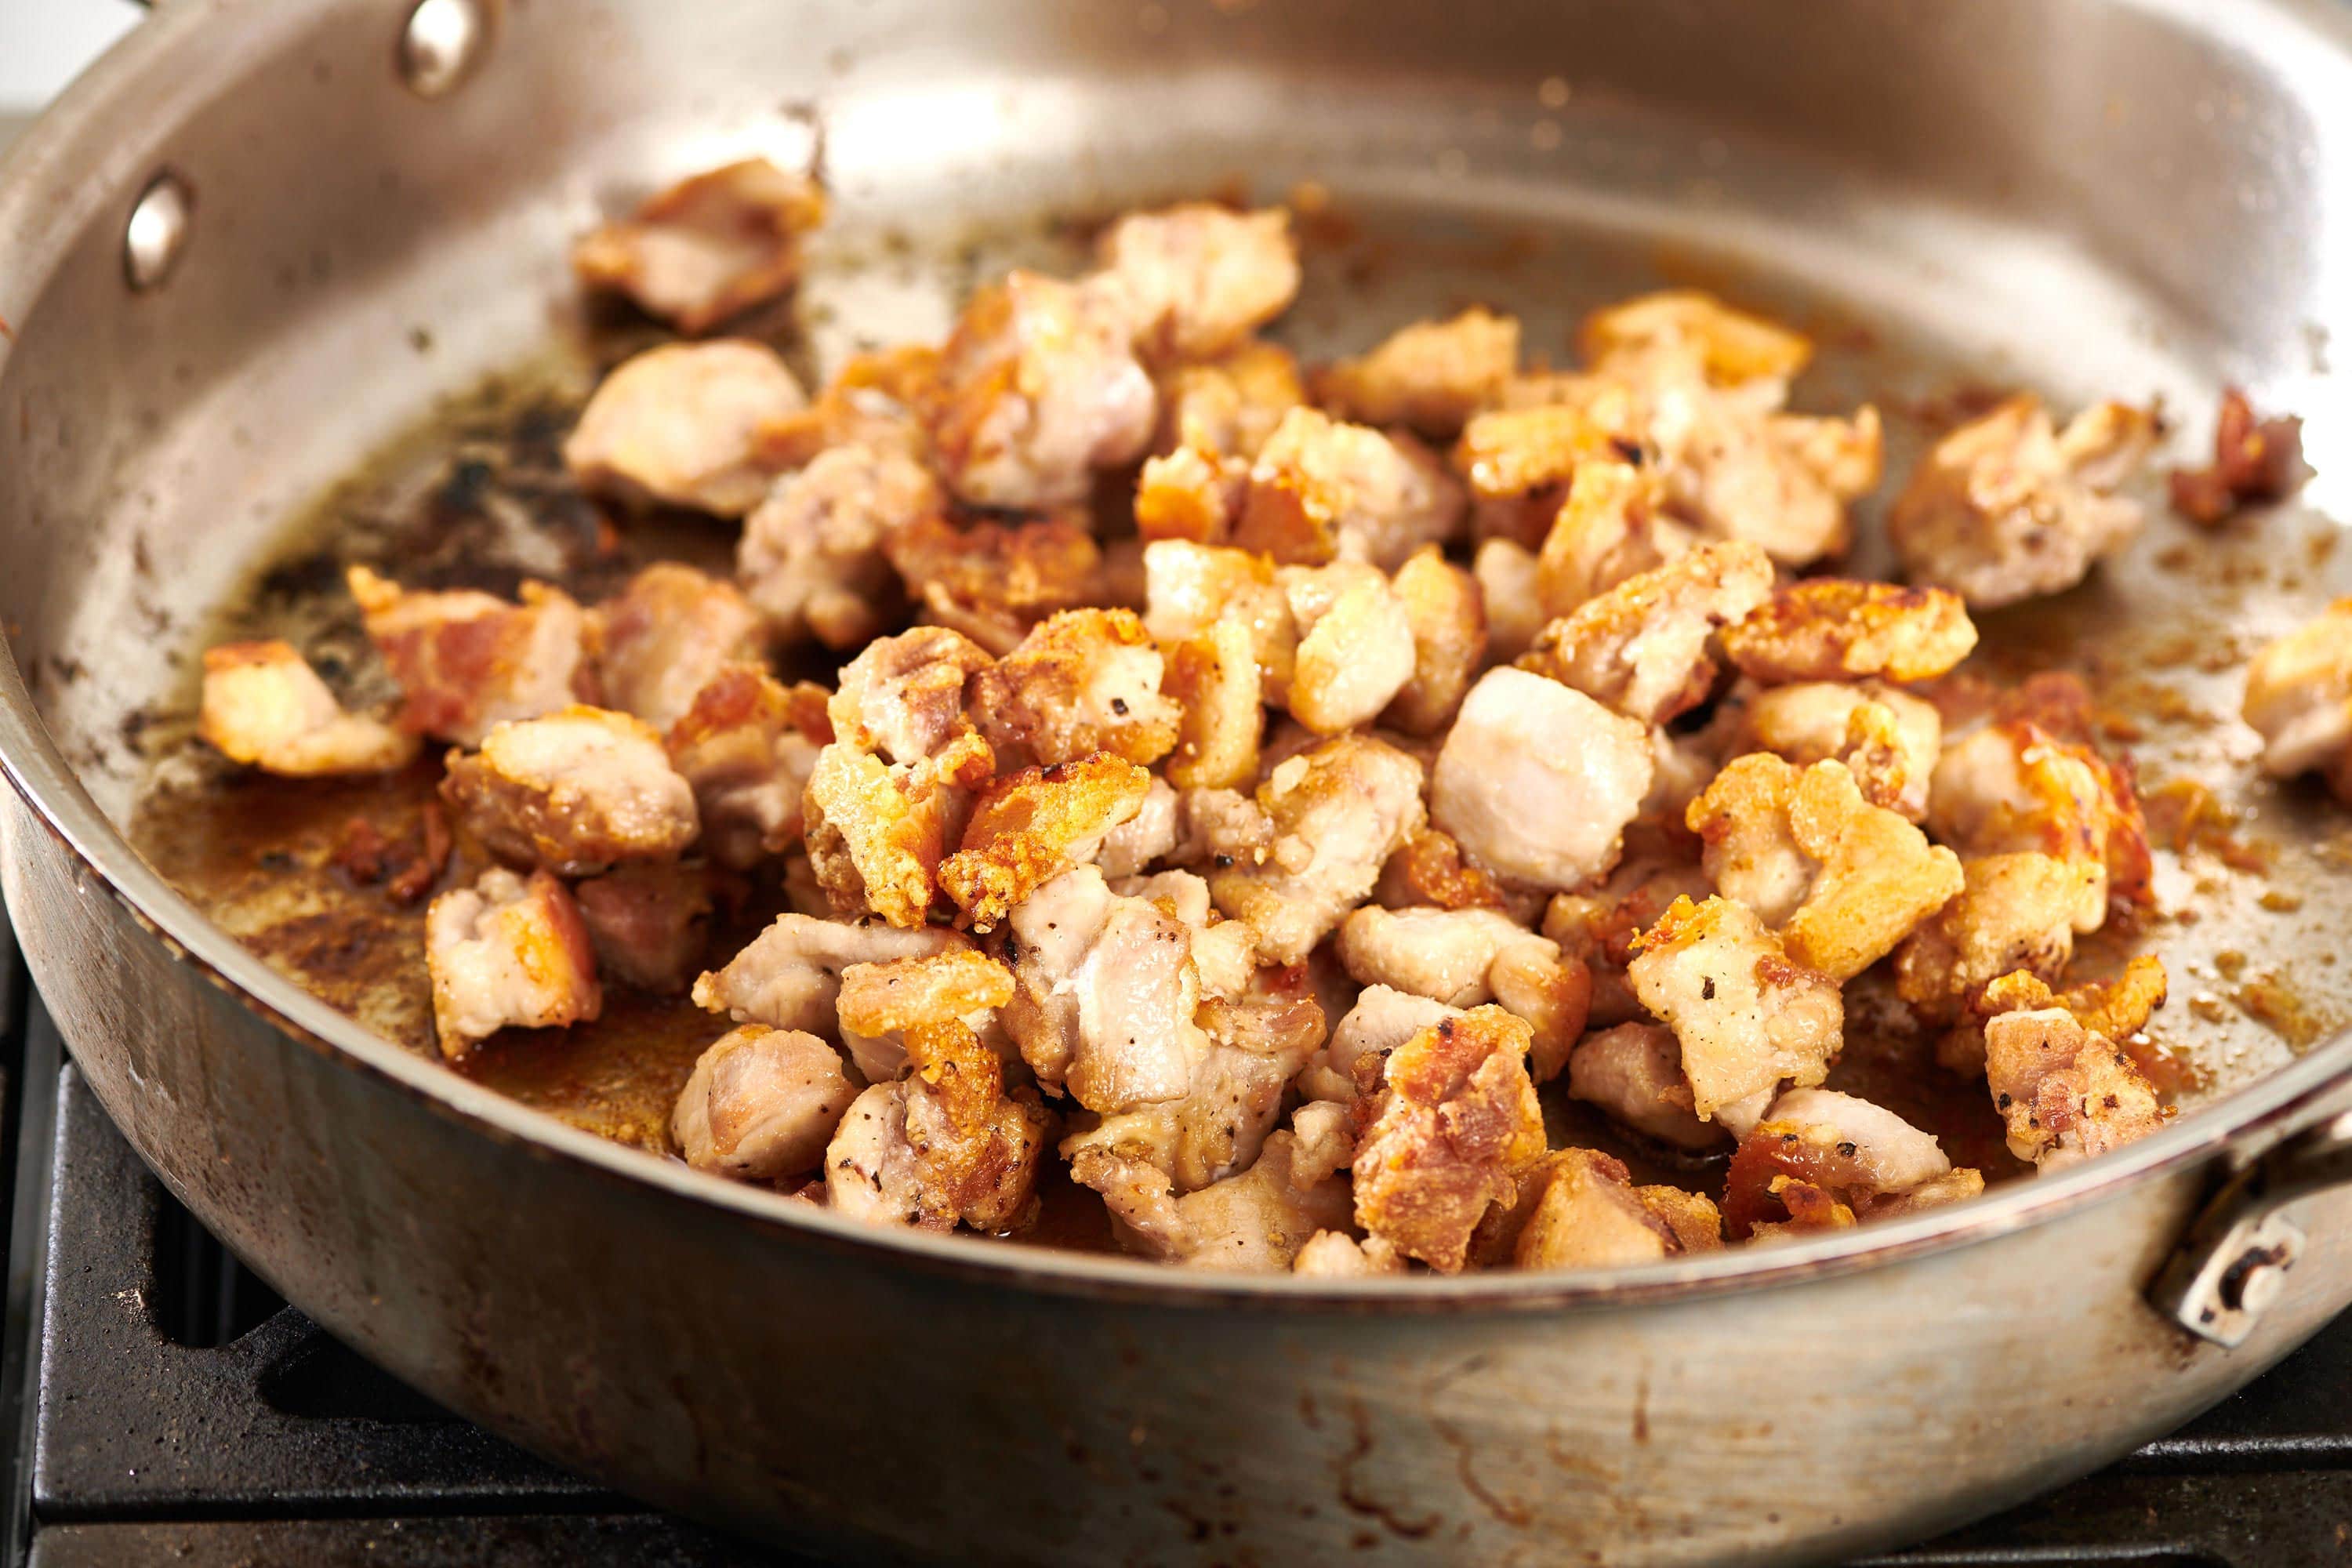 Cubed chicken cooking in pan.